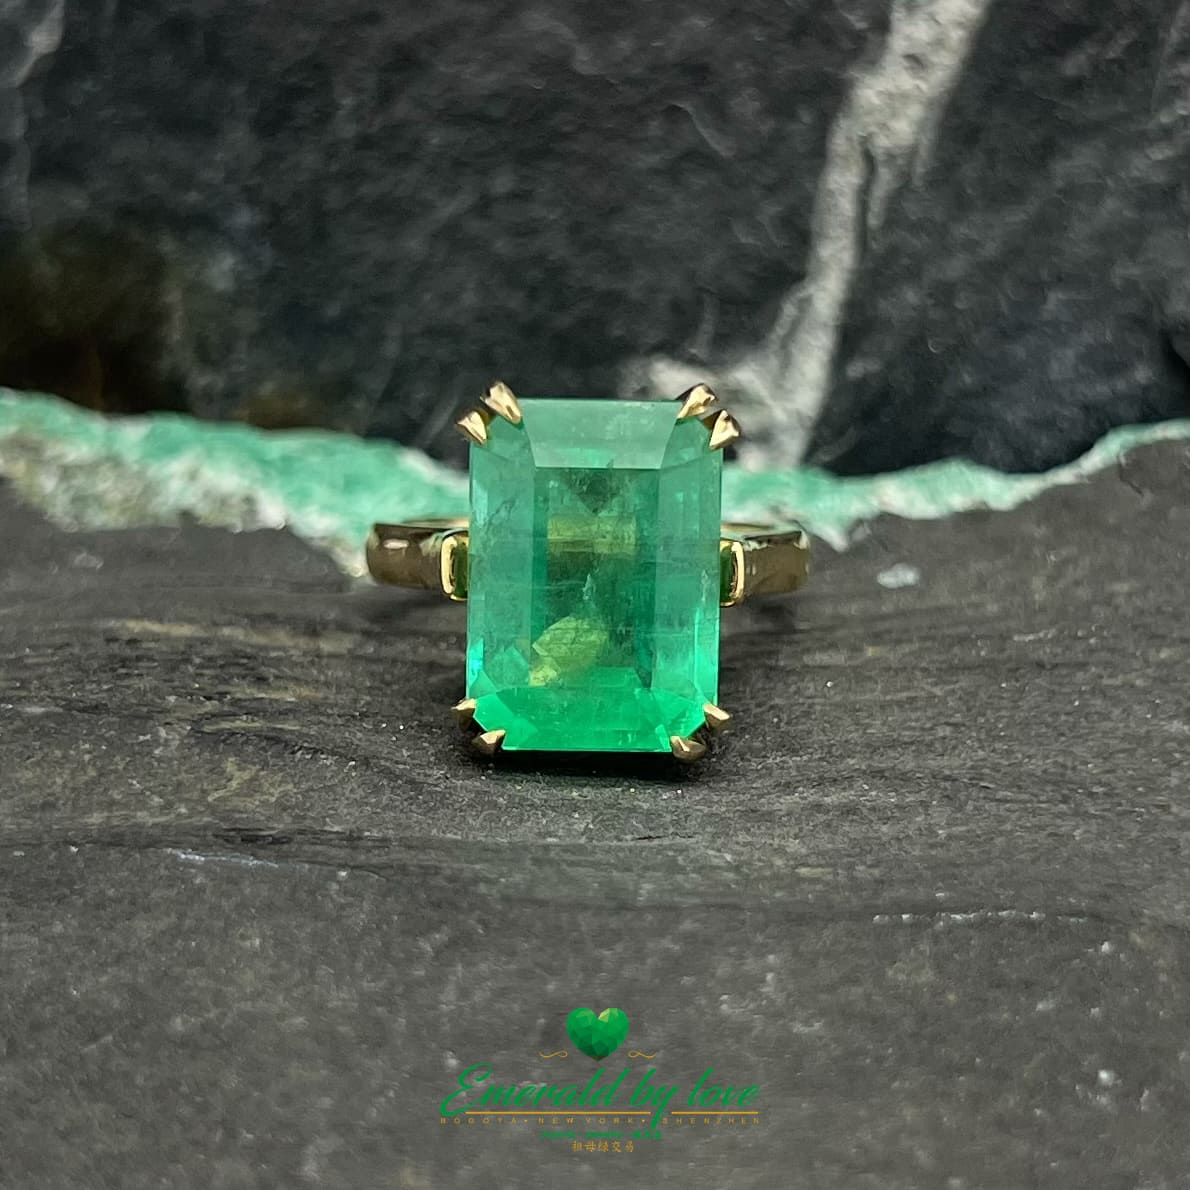 Magnificent Majesty: Yellow Gold Ring with Spectacular Emerald-Cut Emerald Centerpiece